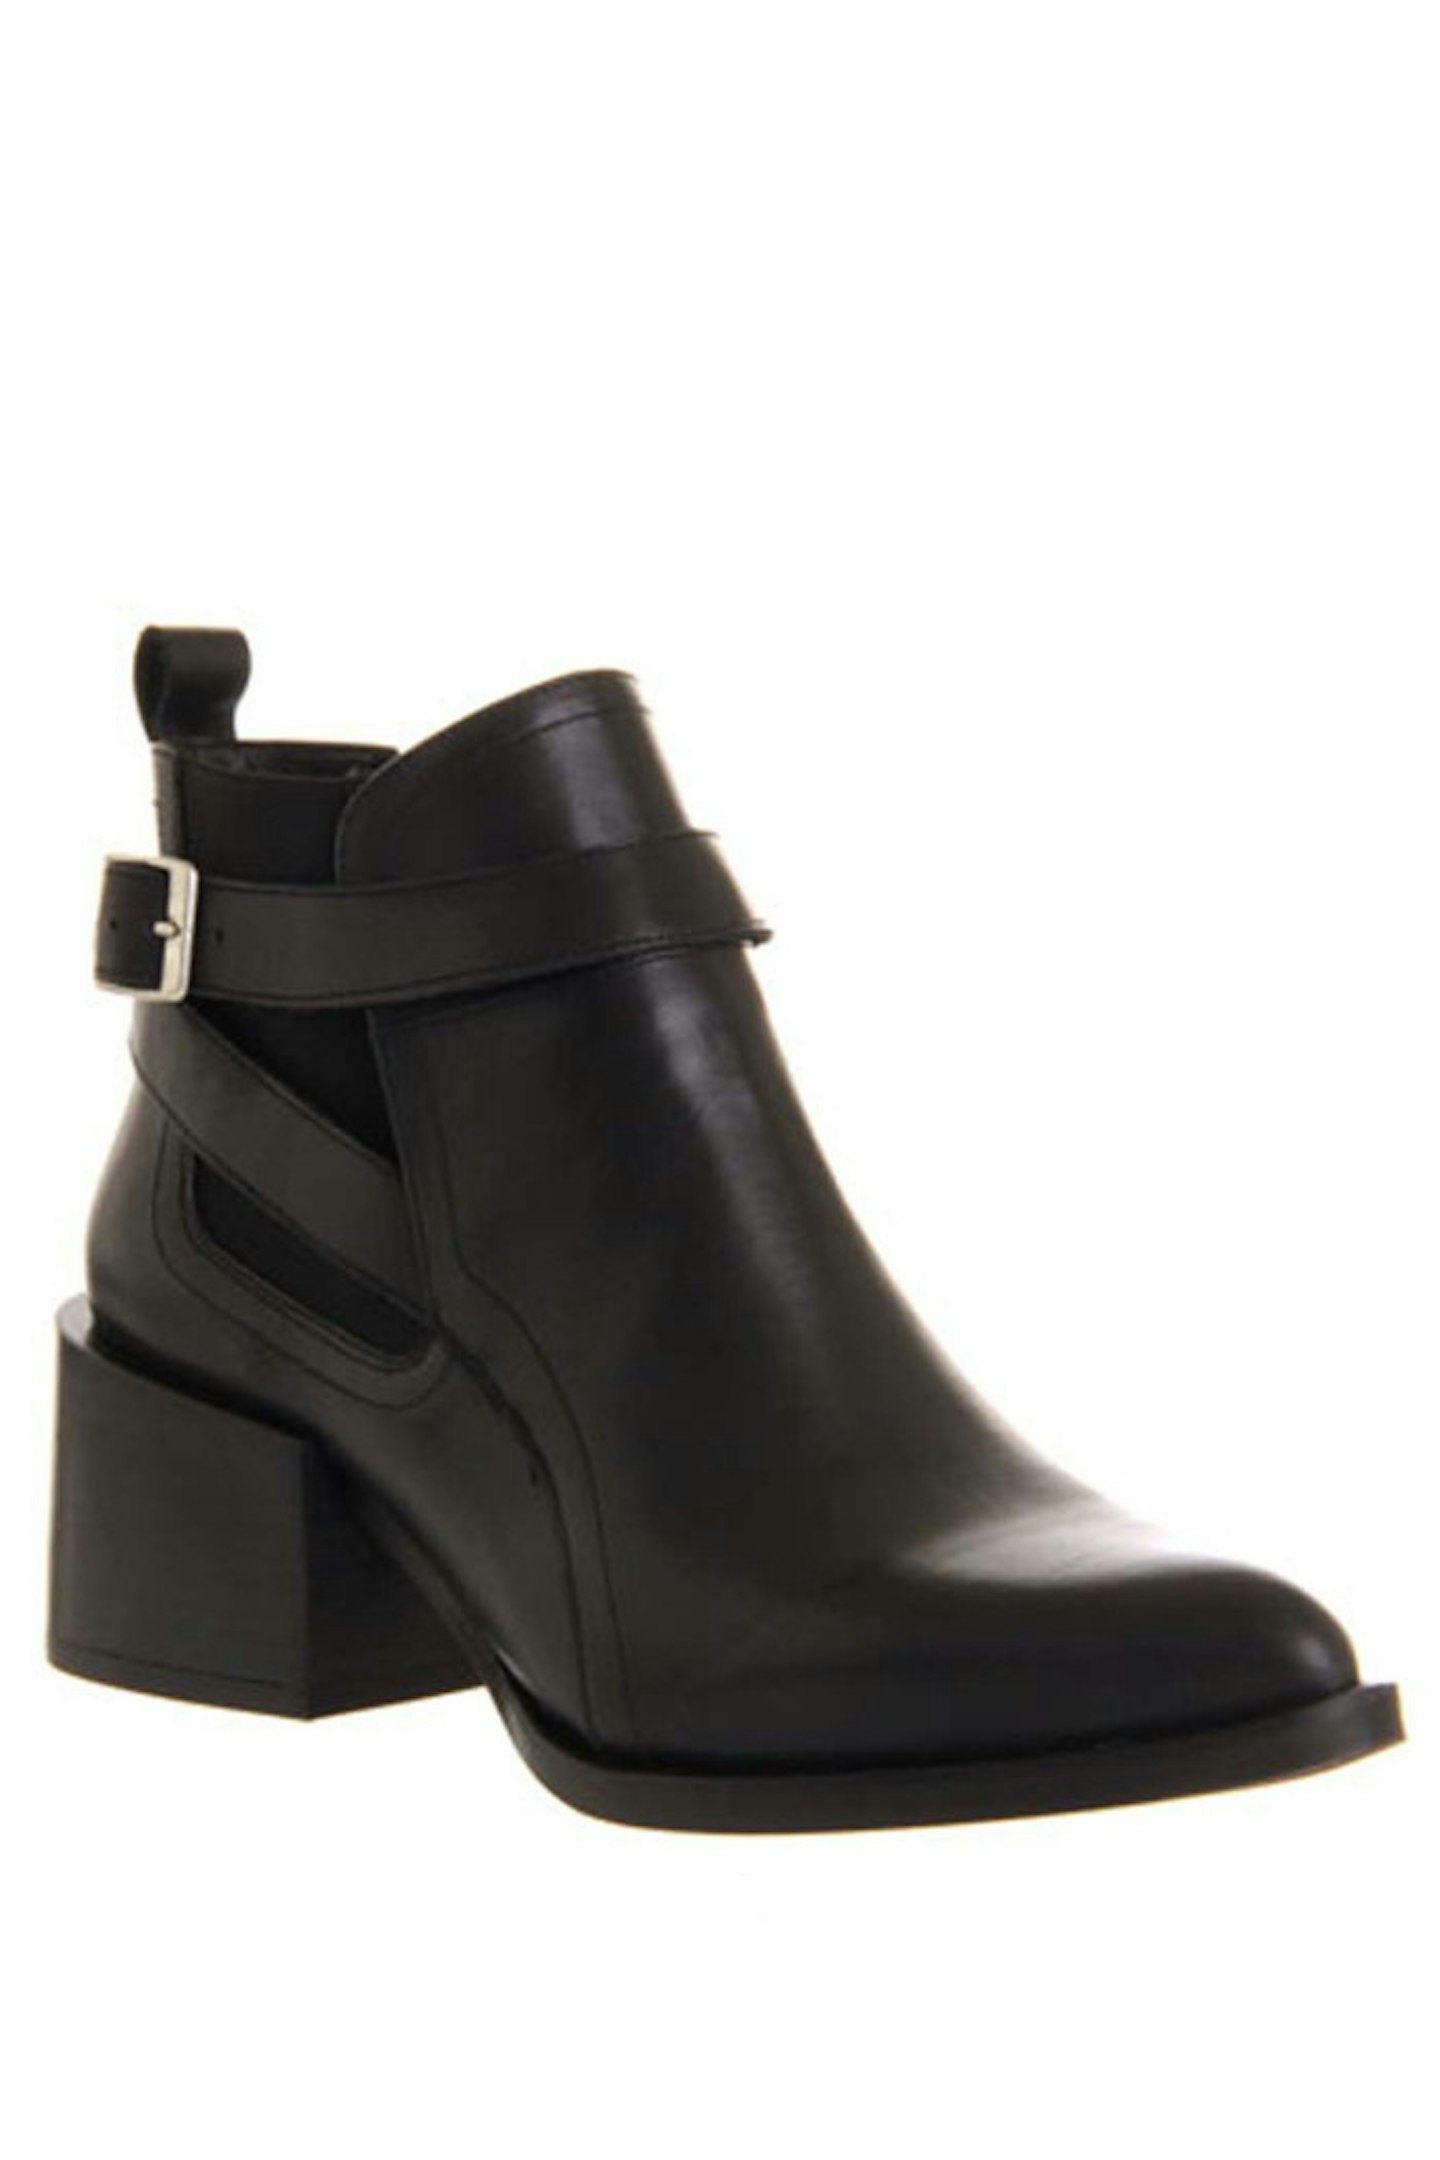 8. Madison Cupped Heel Boot